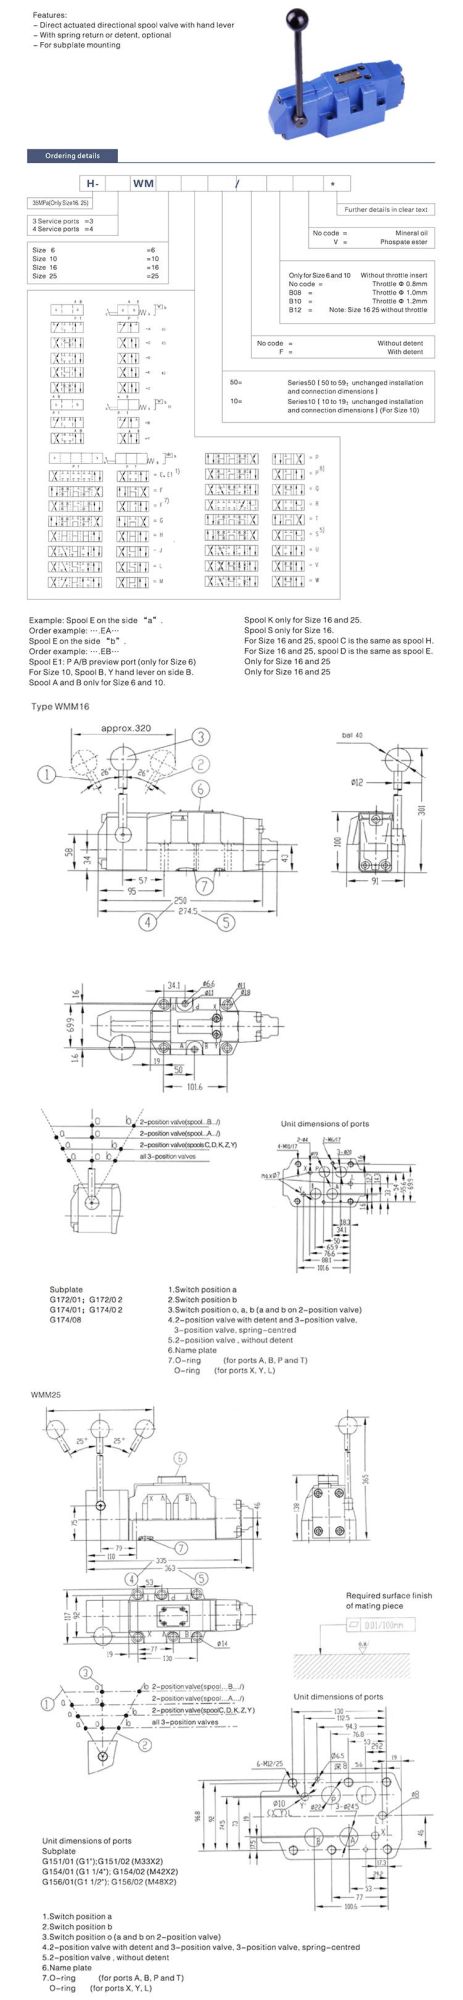 4WMM10A/B/D/Y/E/J/L/U/G/T directional control valves with hand lever type